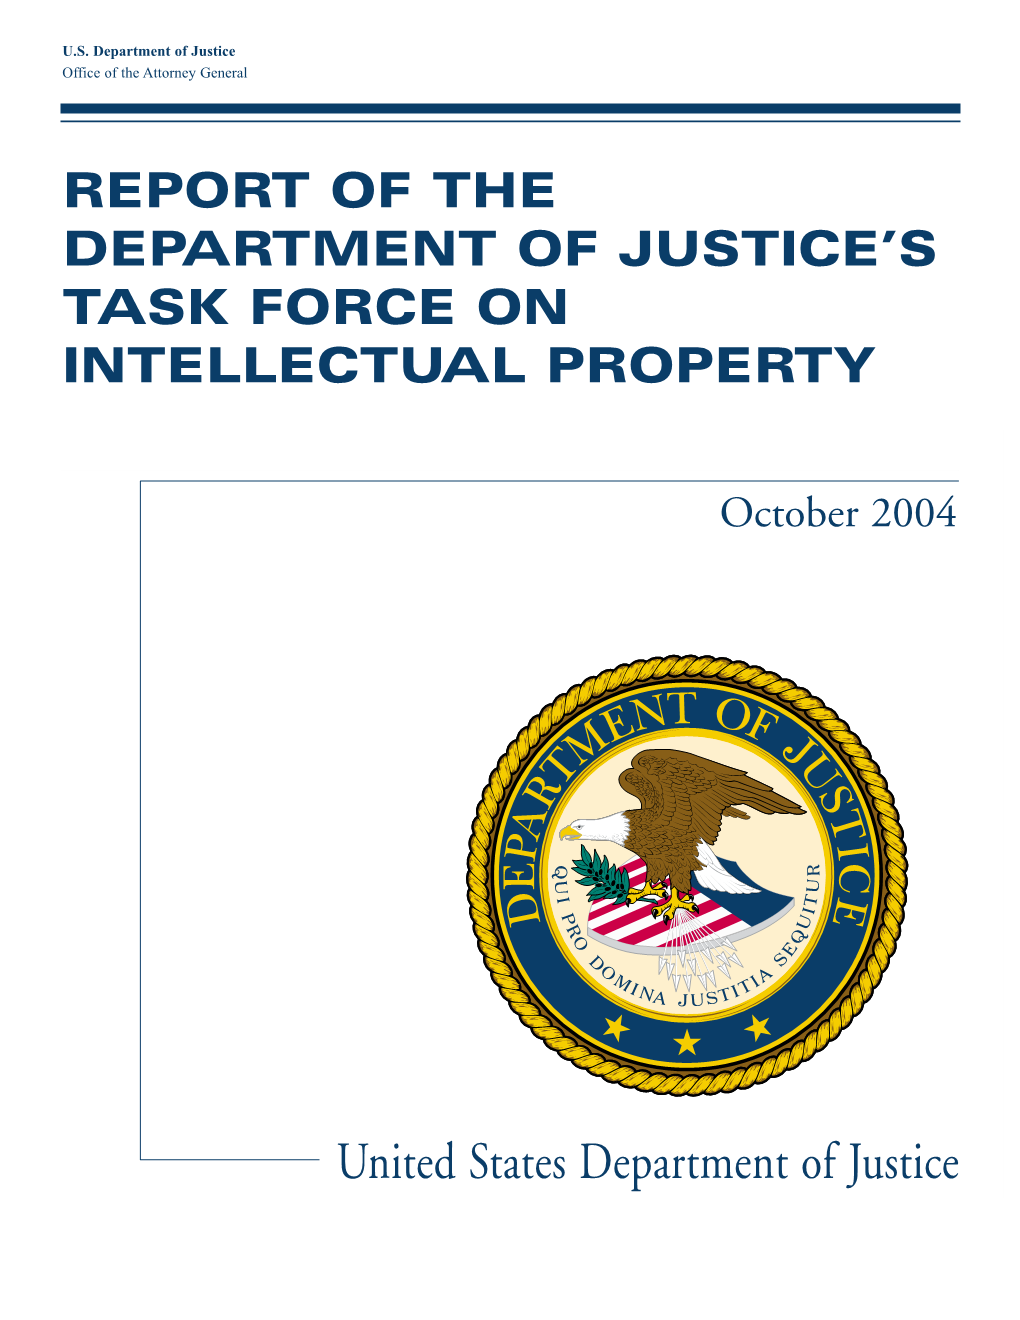 Report of the Department of Justice's Intellectual Property Task Force